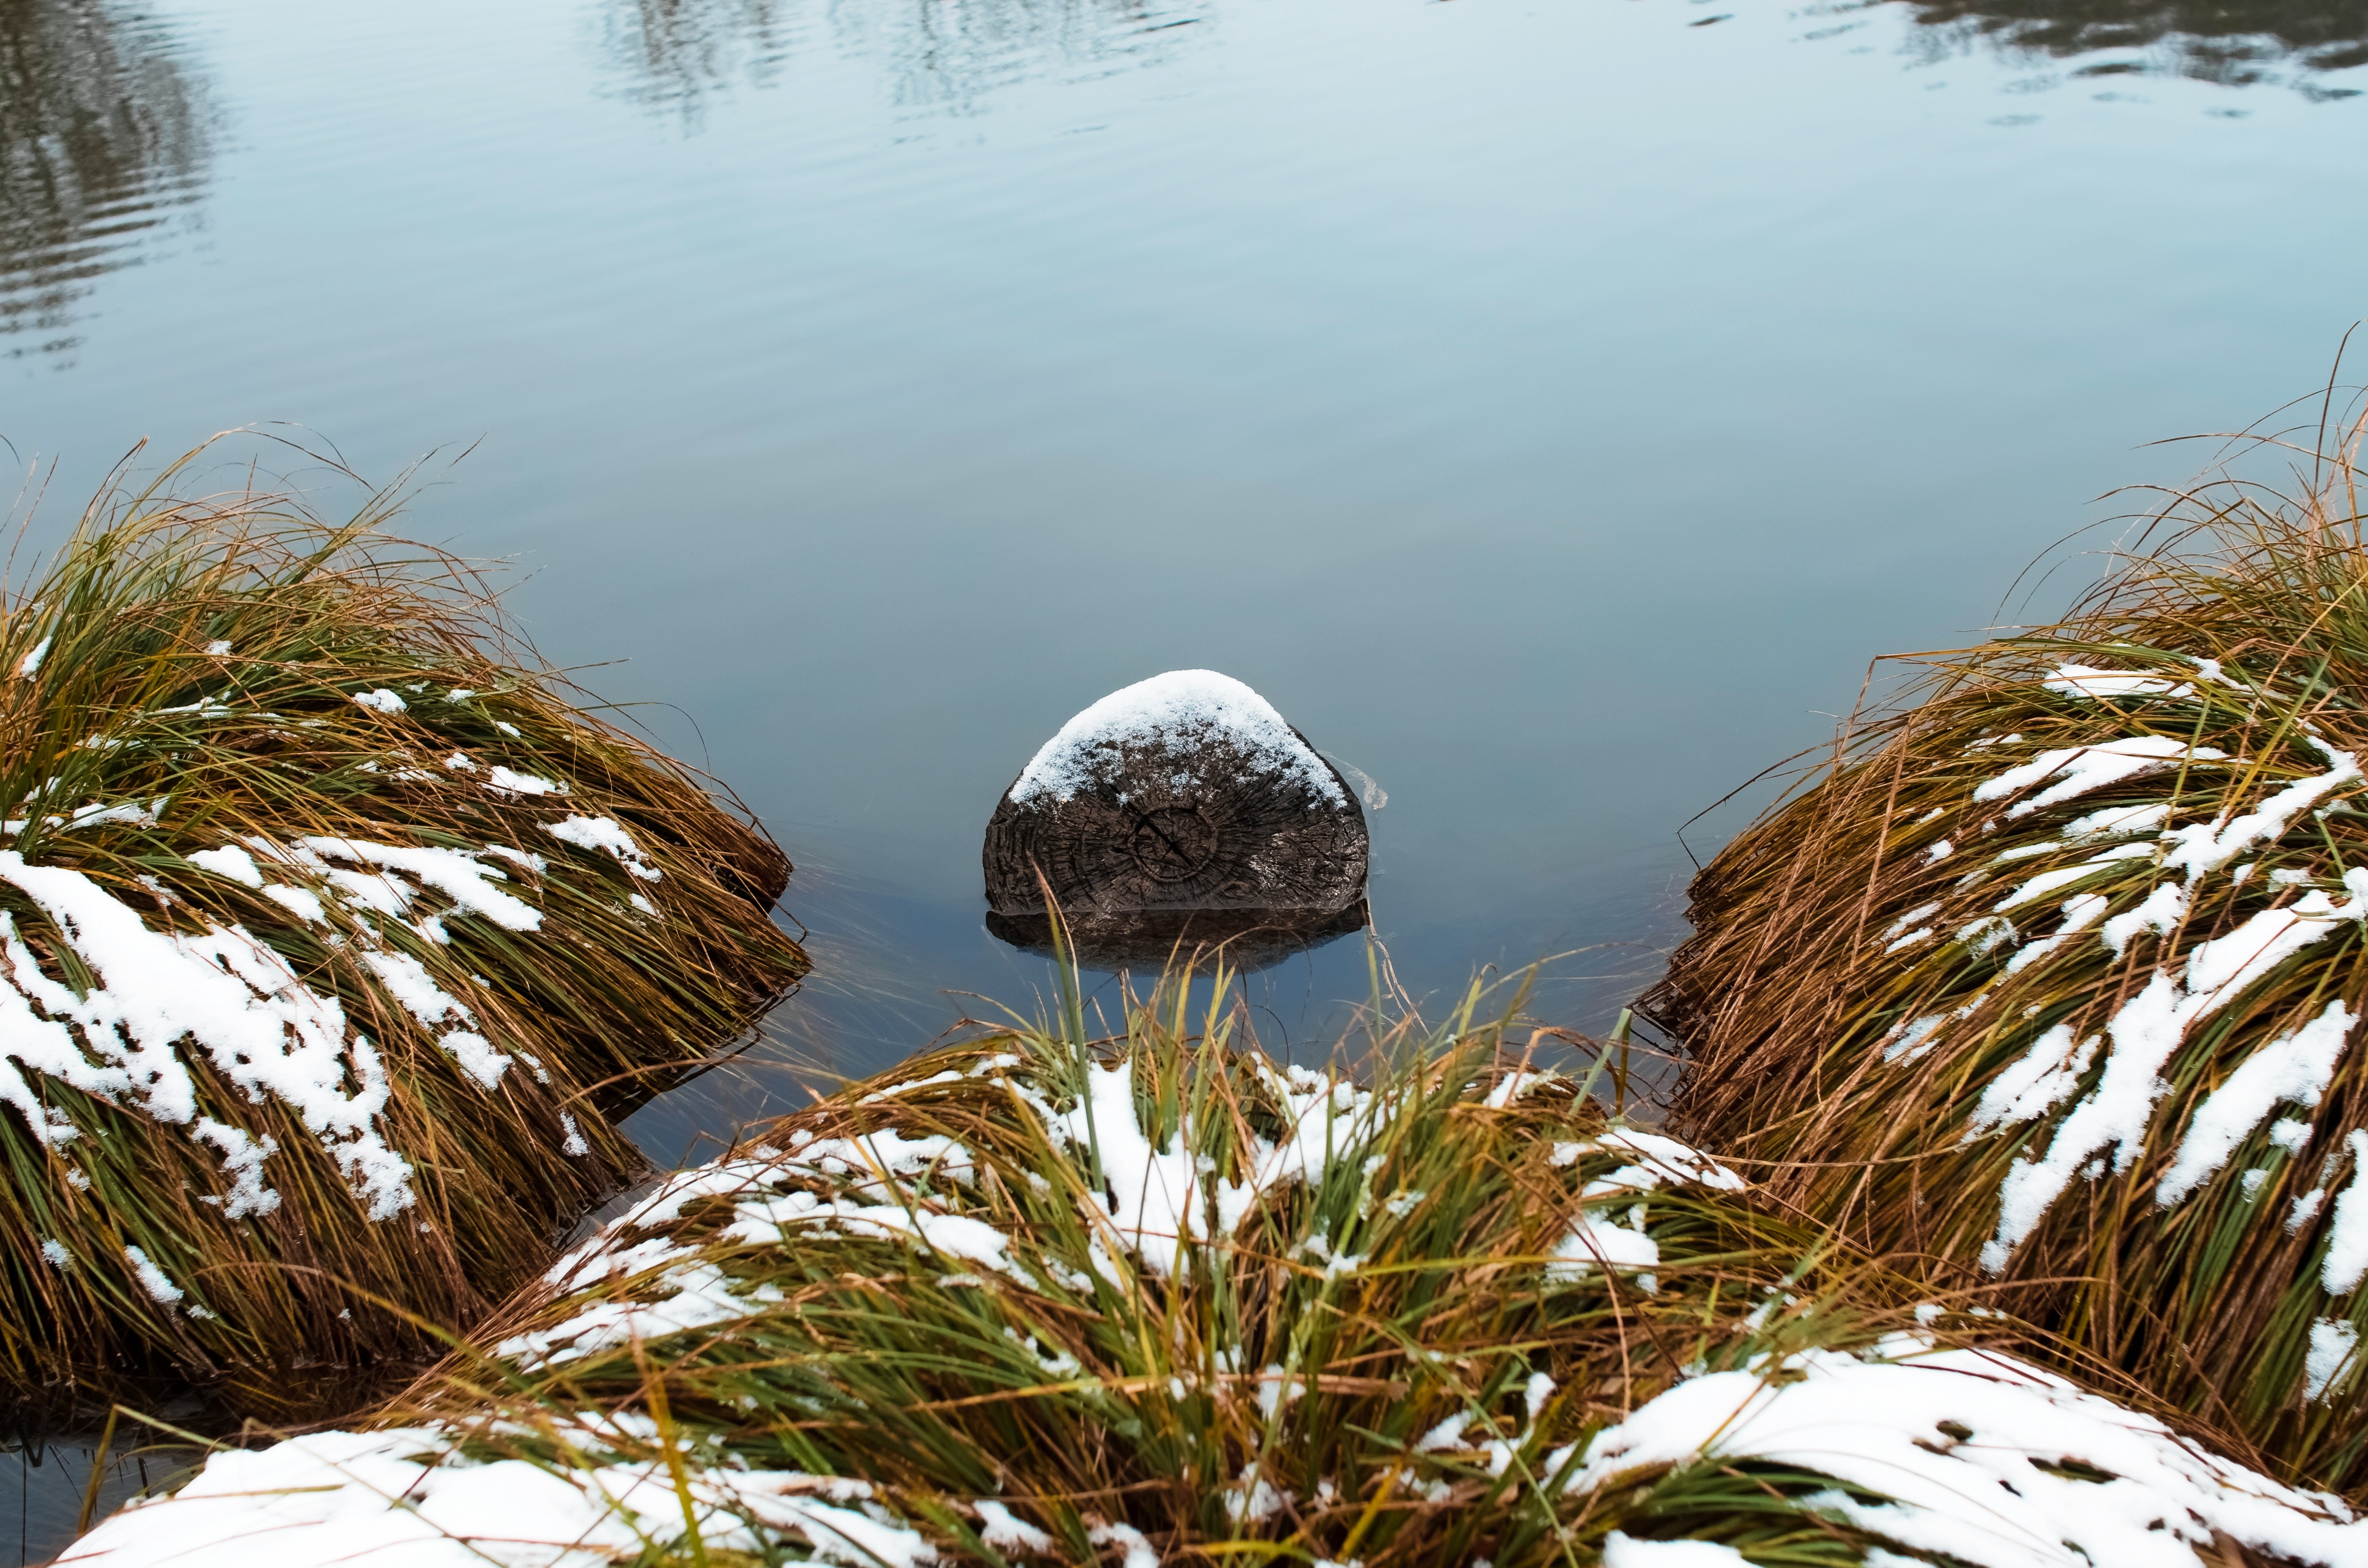 Pond Winterisation Guide: Preparing Your Pond & Fish for Winter